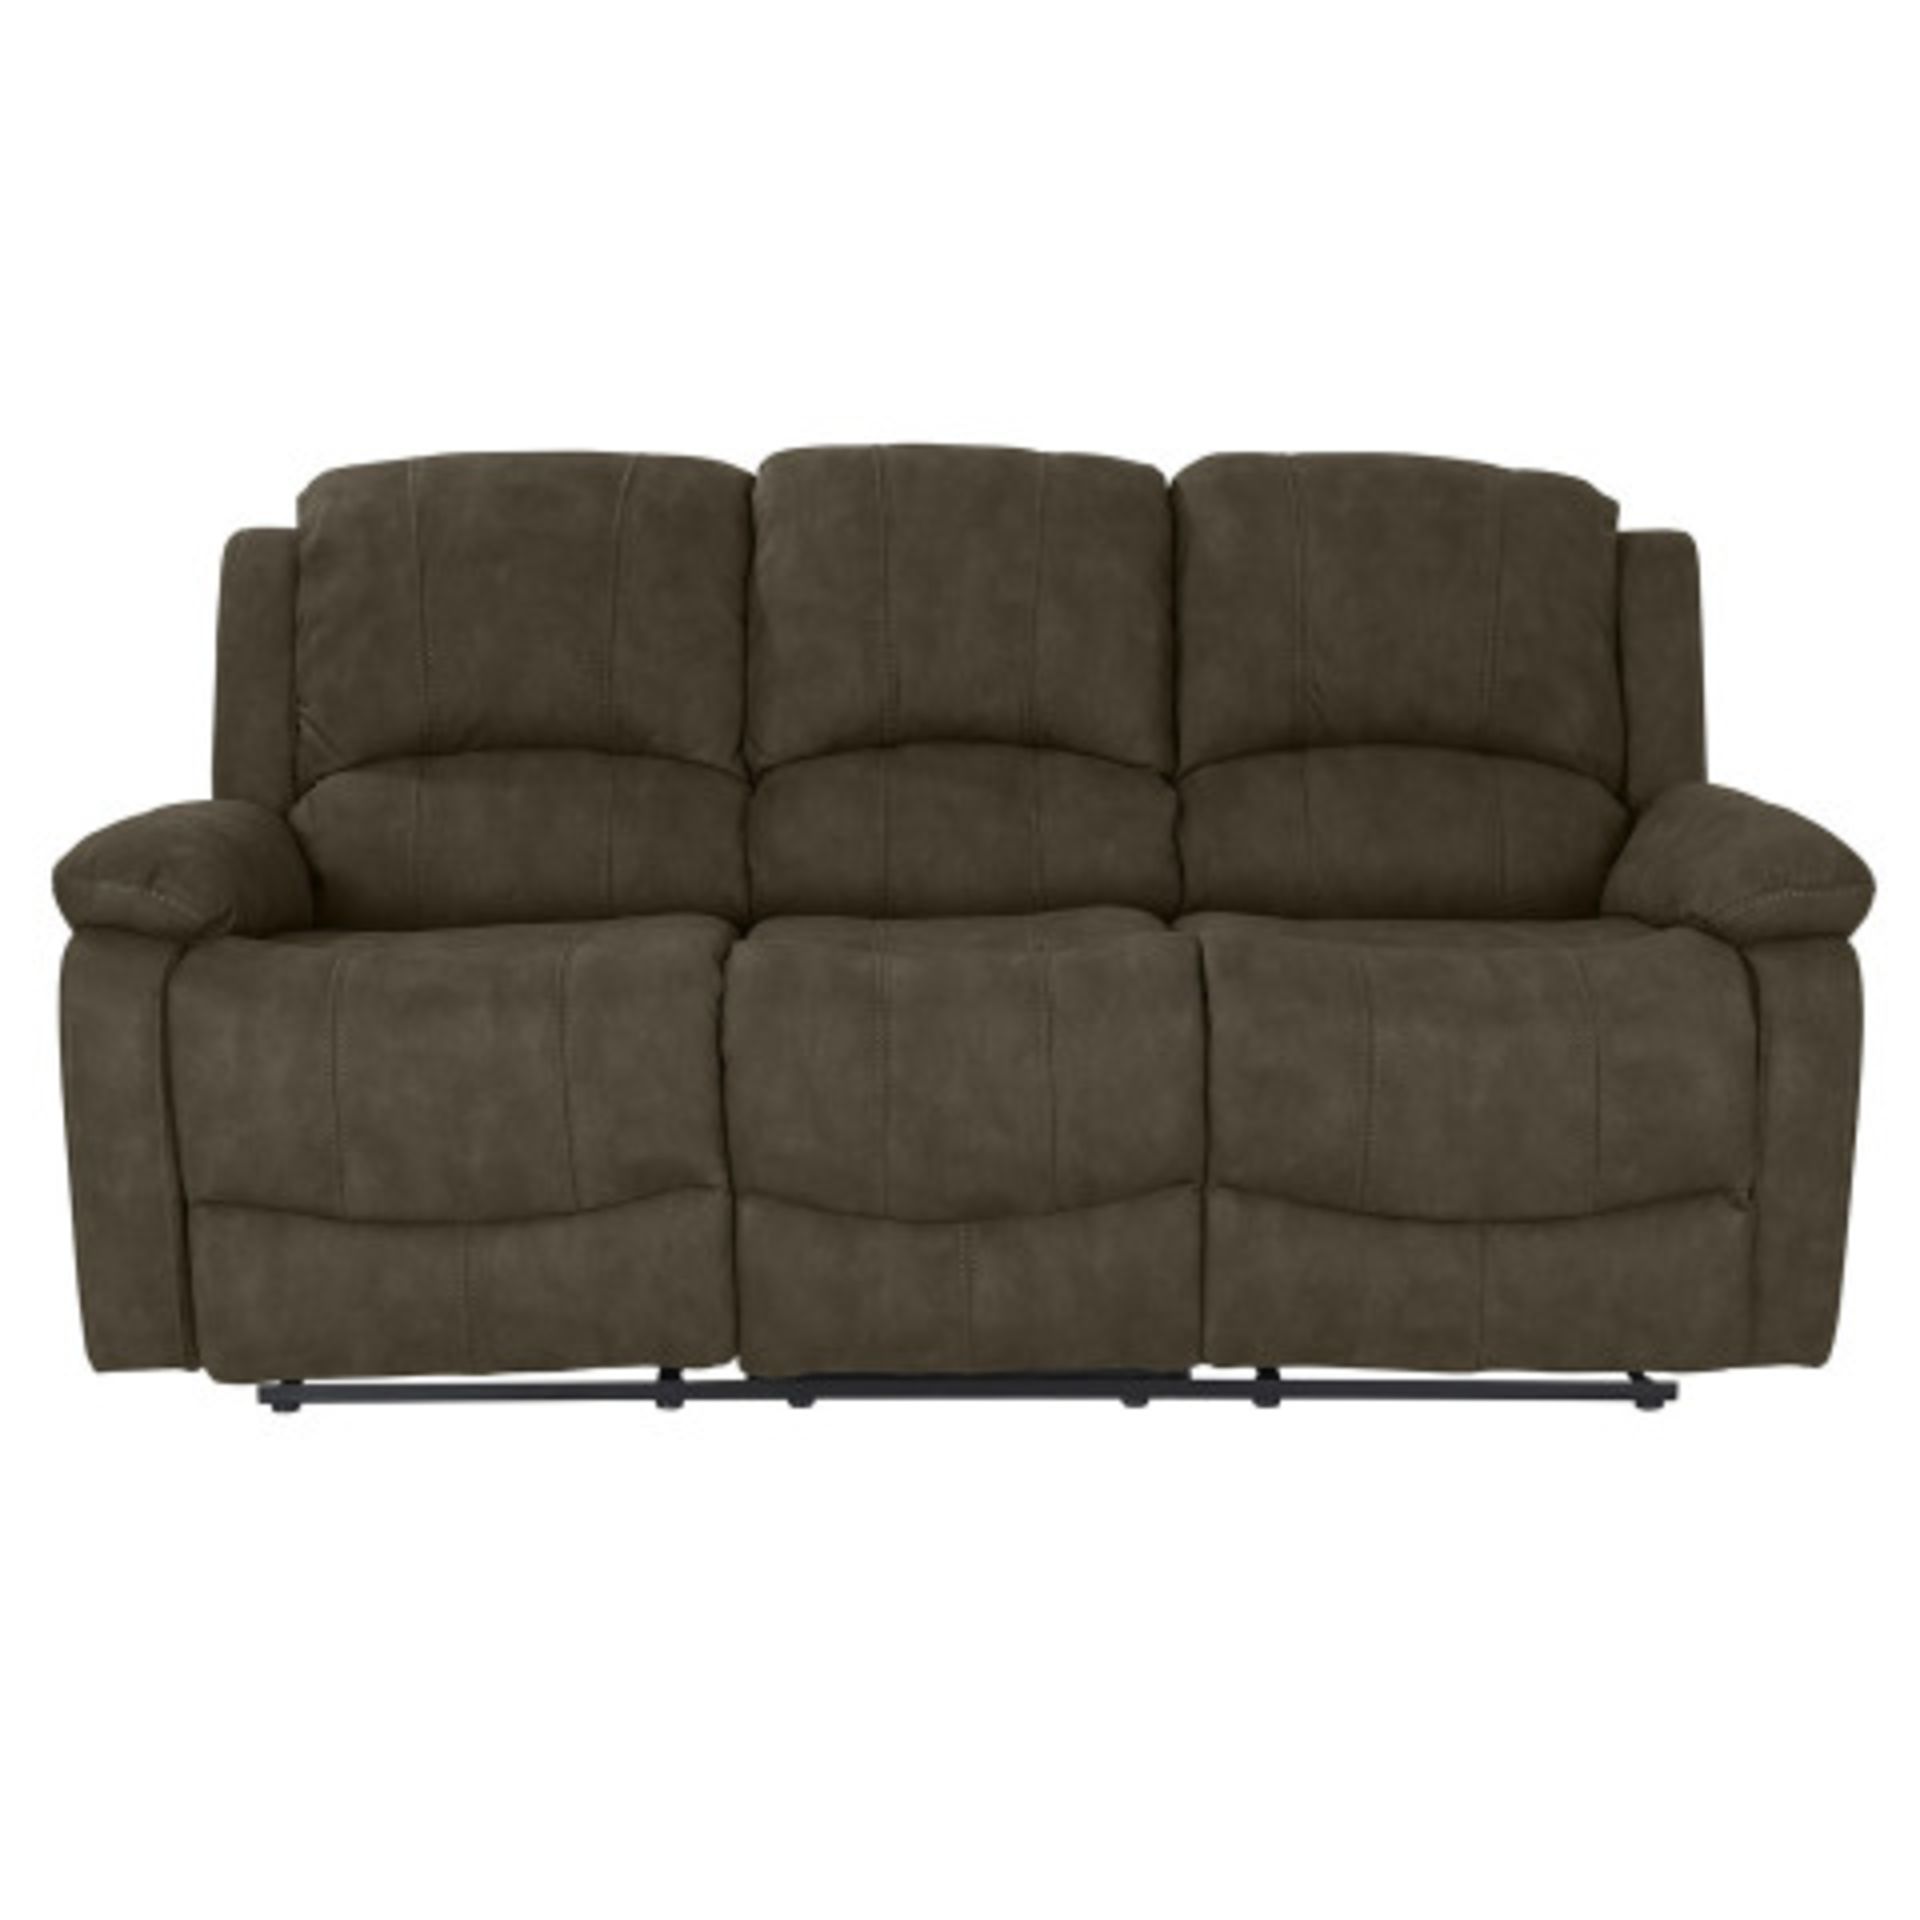 Brand New Boxed Vivo 3 Seater Plus 2 Seater Reclining Sofas In Brown Suede Fabric